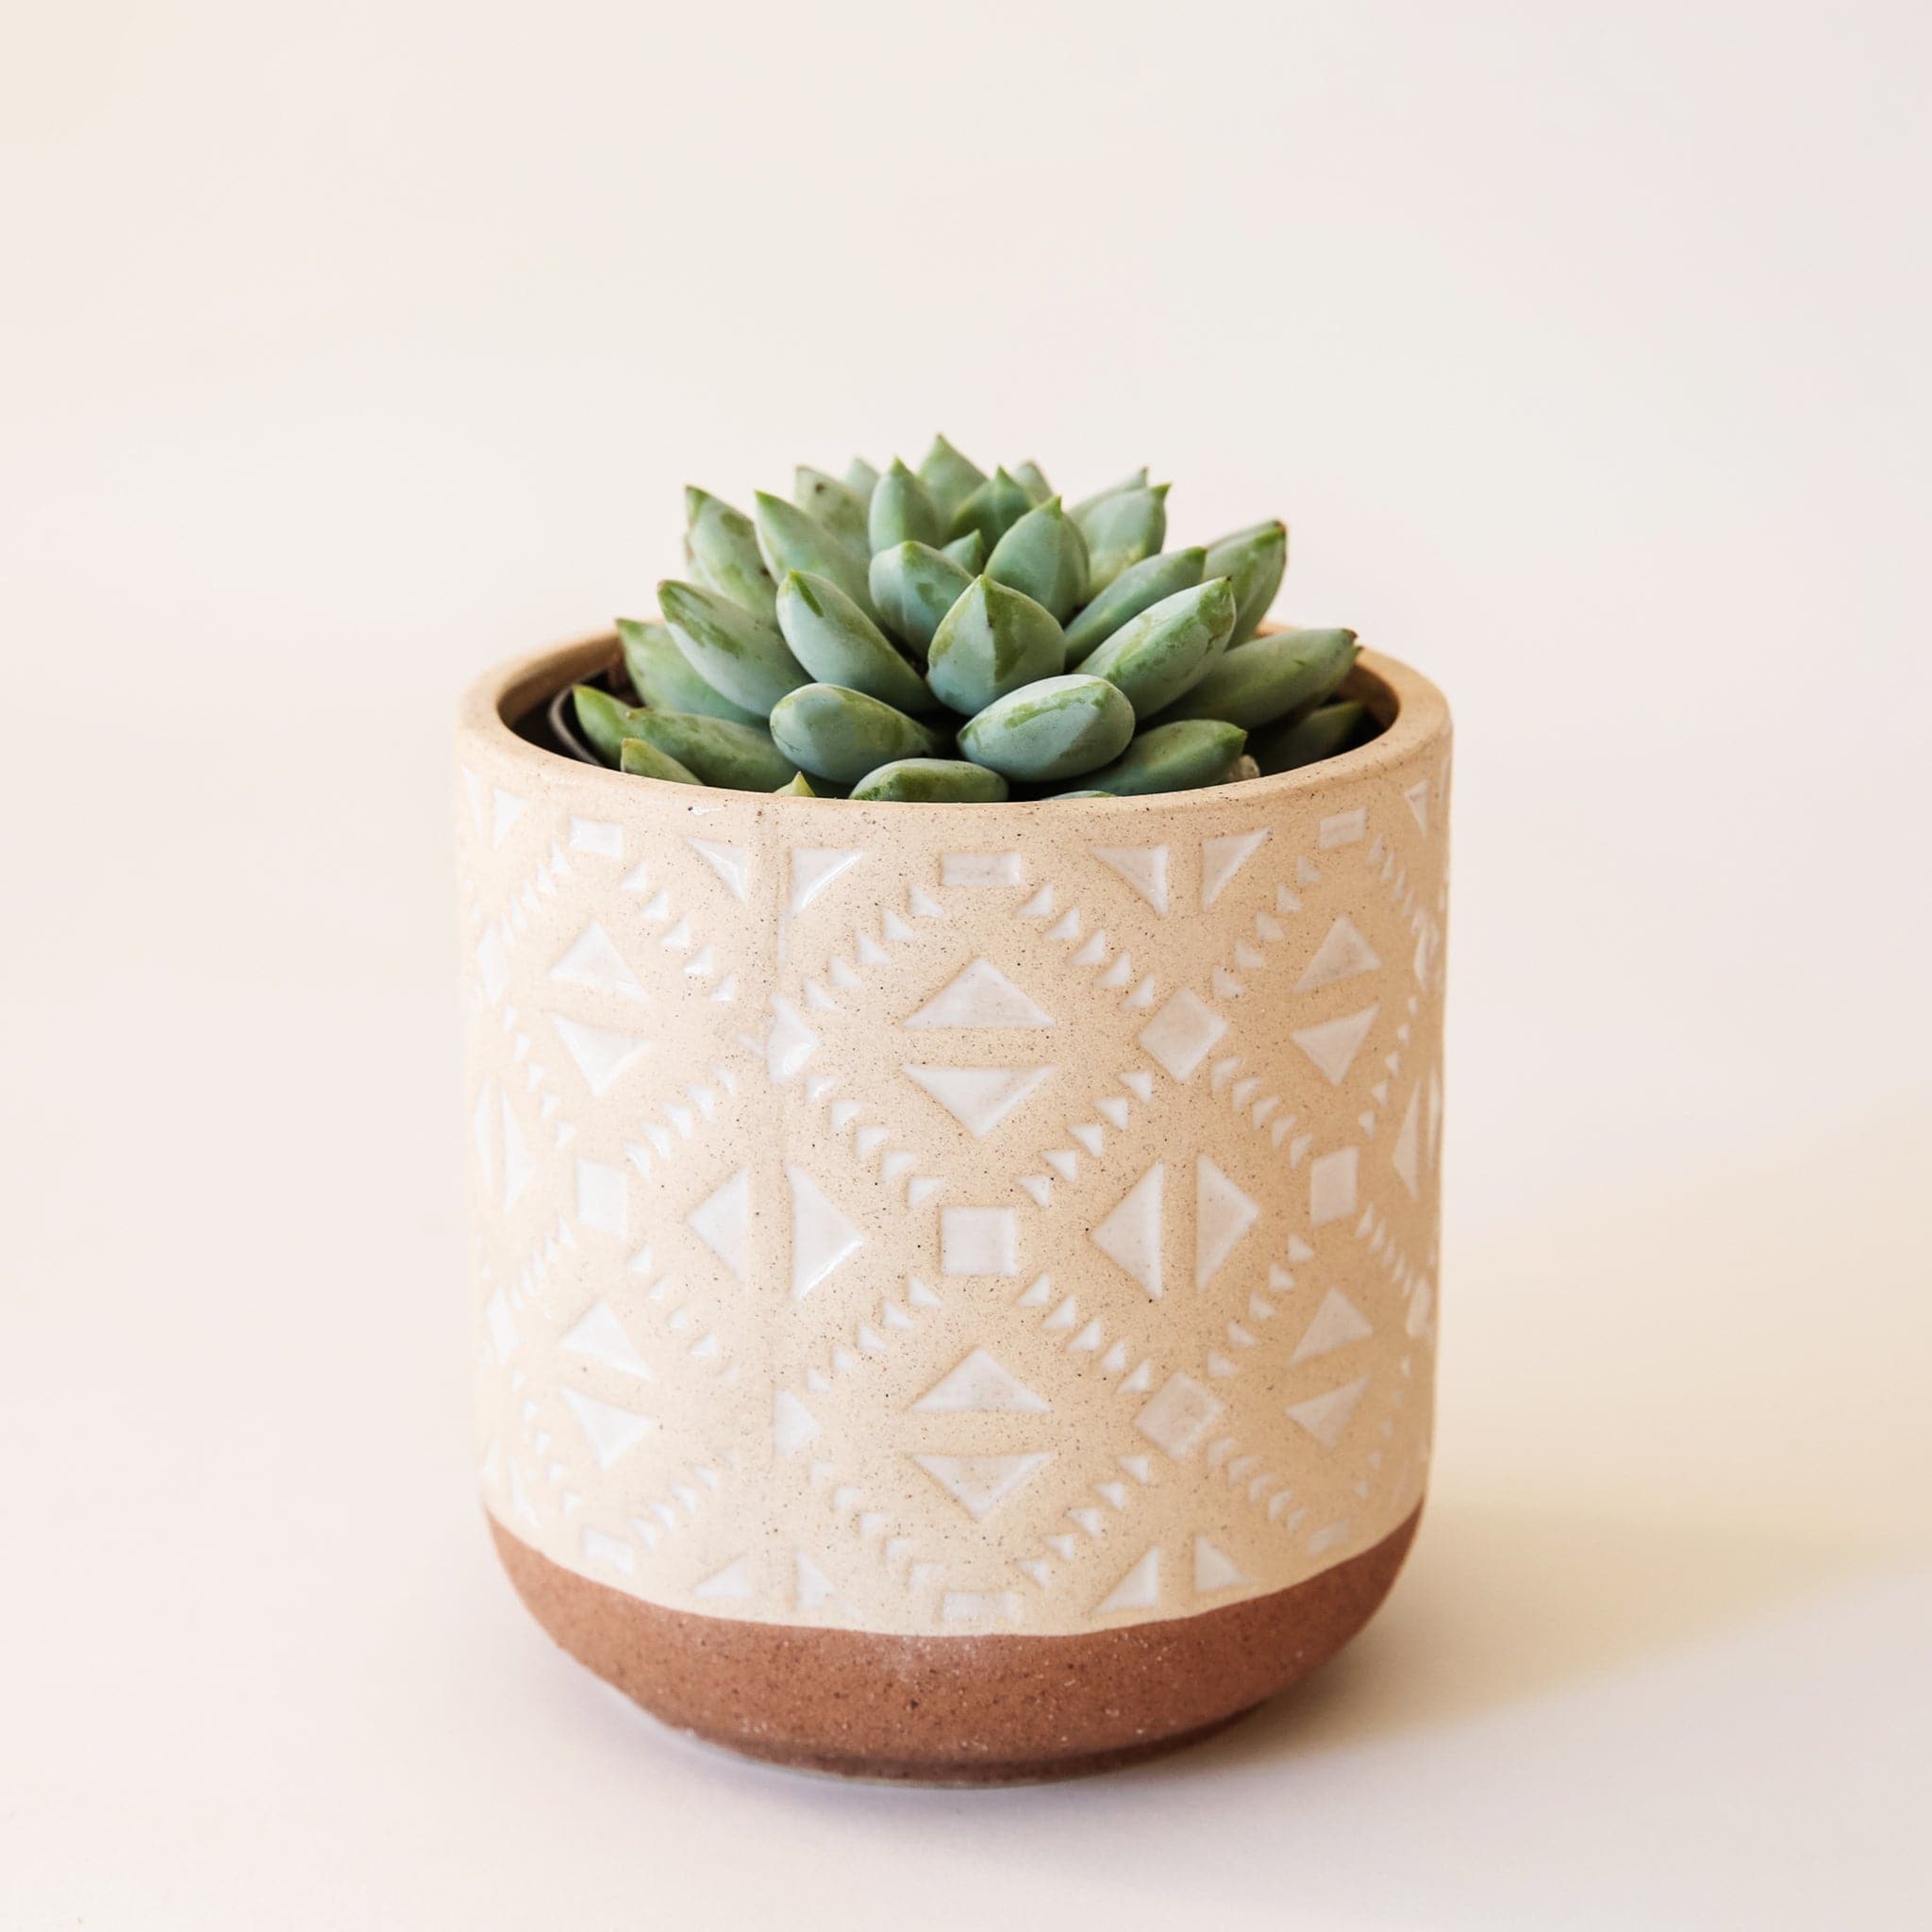 A pot where the bottom tapers and us rounded The bottom of the vessel is a dark tan while the top color is lighter with white imprinted aztec inspired triangle designs.